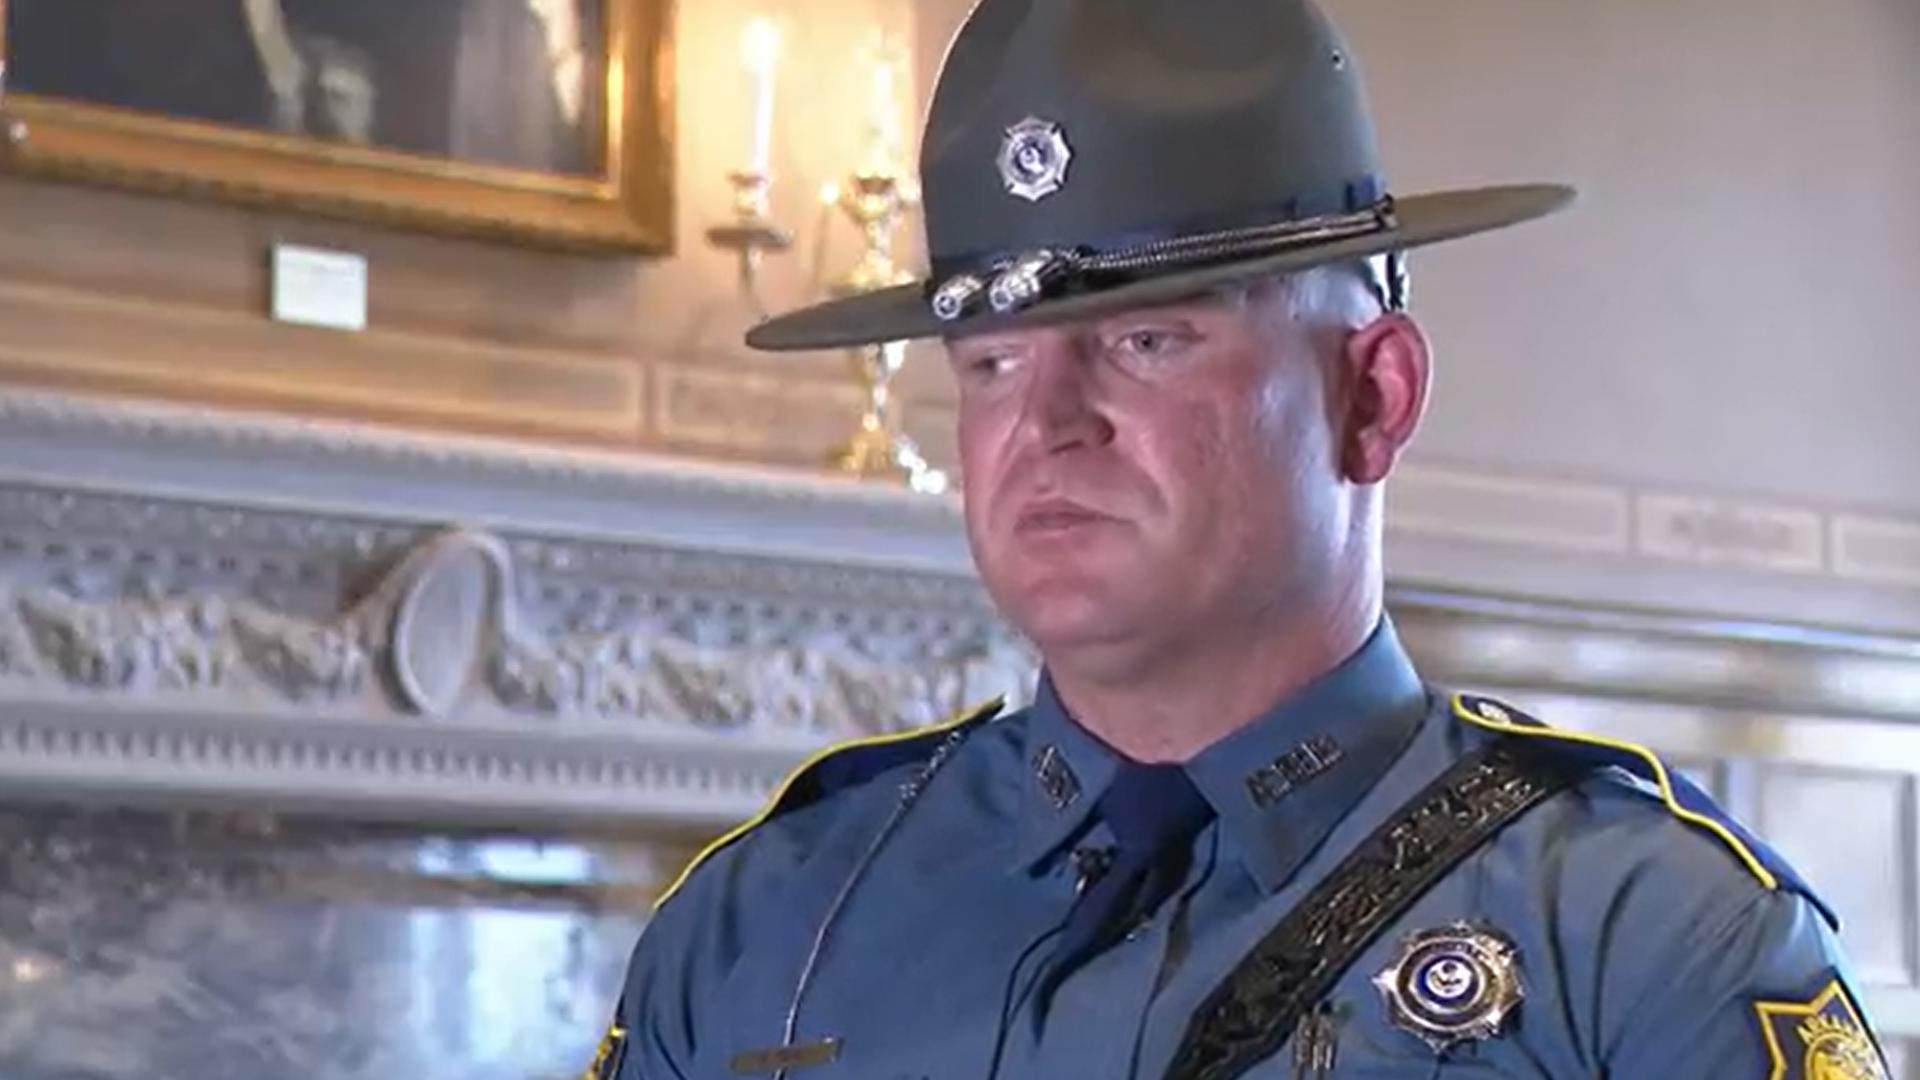 A new class of state troopers graduated and swore their oaths at the Arkansas State Capitol, and for one trooper, wearing the badge and hat was in his genes.